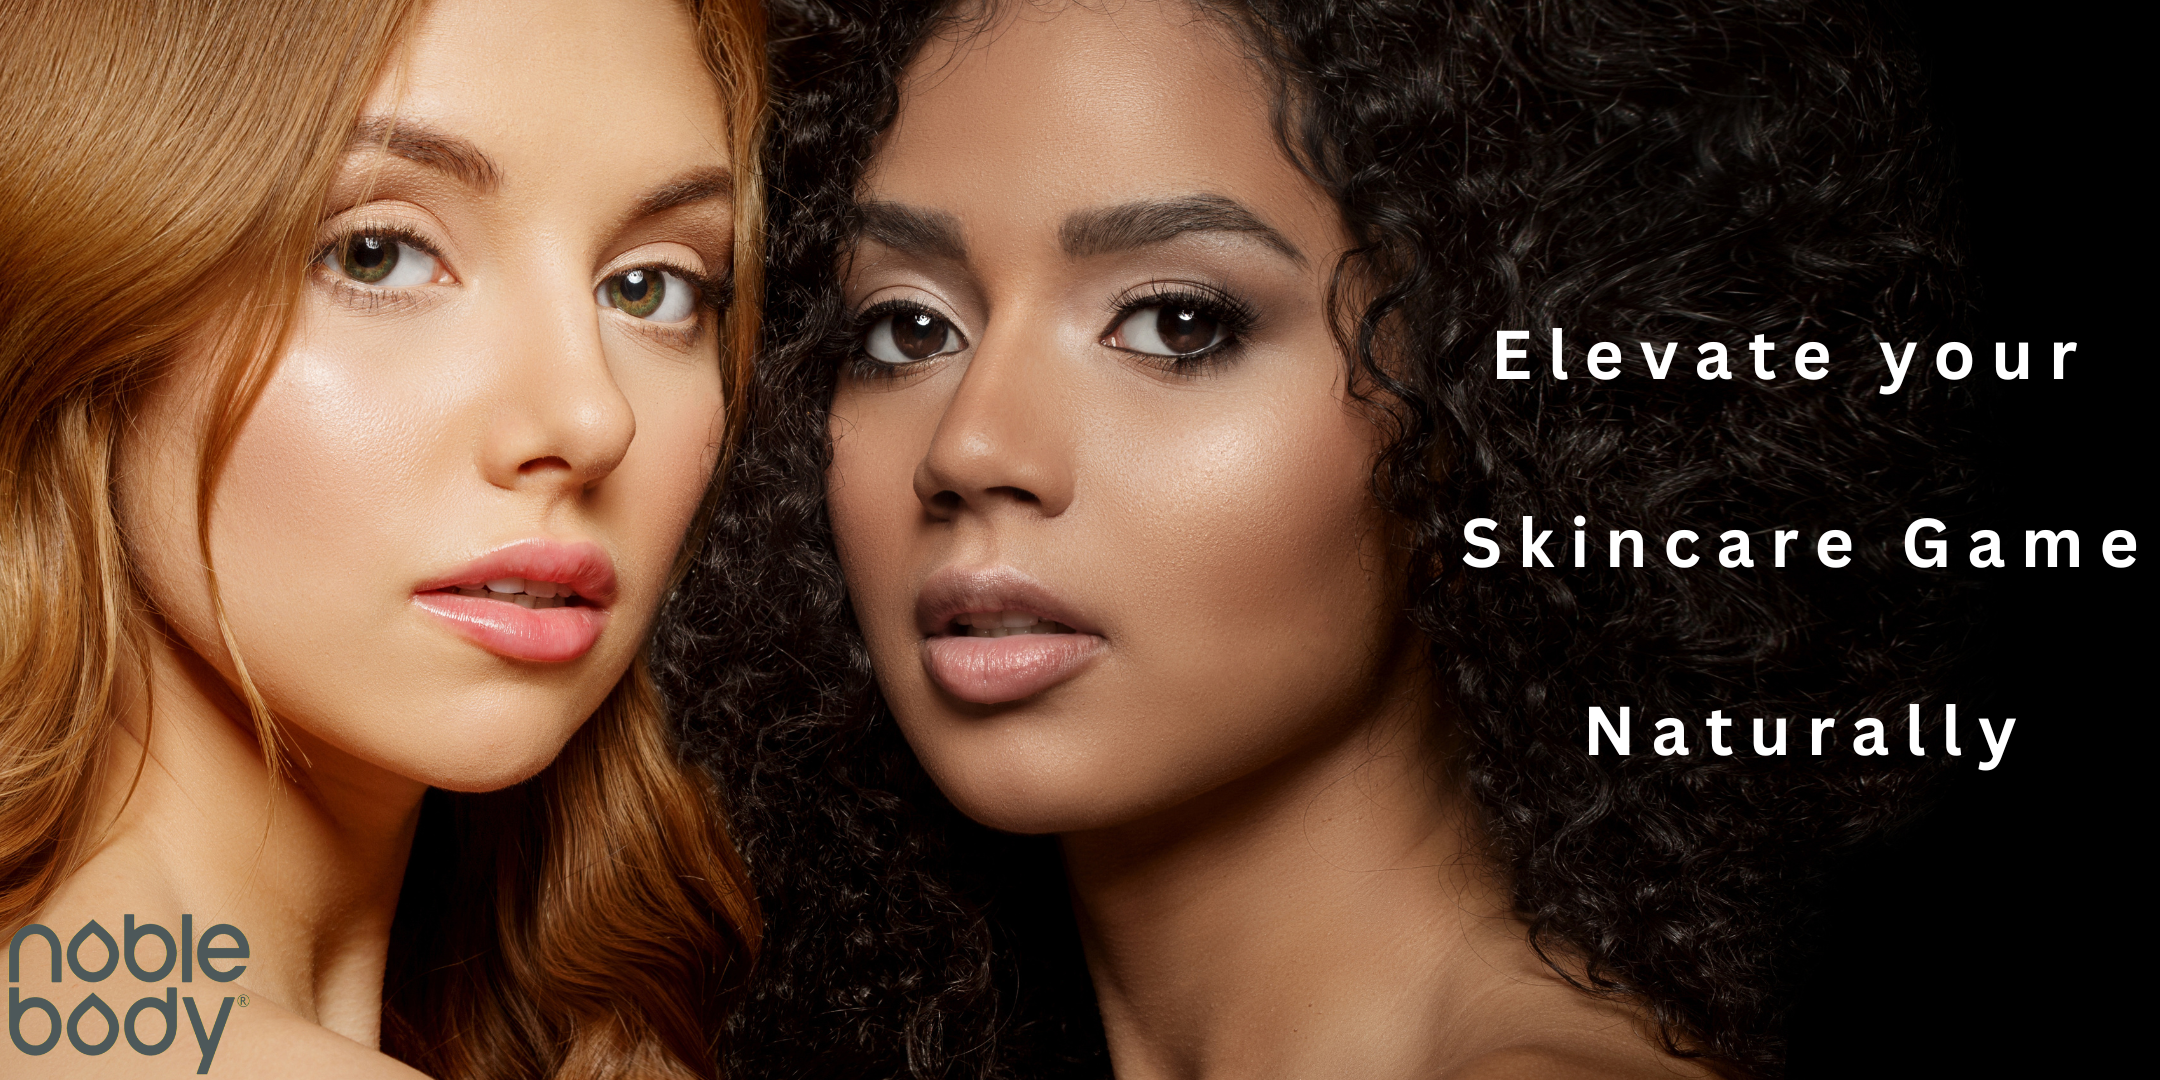 Closeup of two beautiful women, a redhead and brunette looking at the camera. Text reads "elevate your skincare game naturally" in white text on black background.